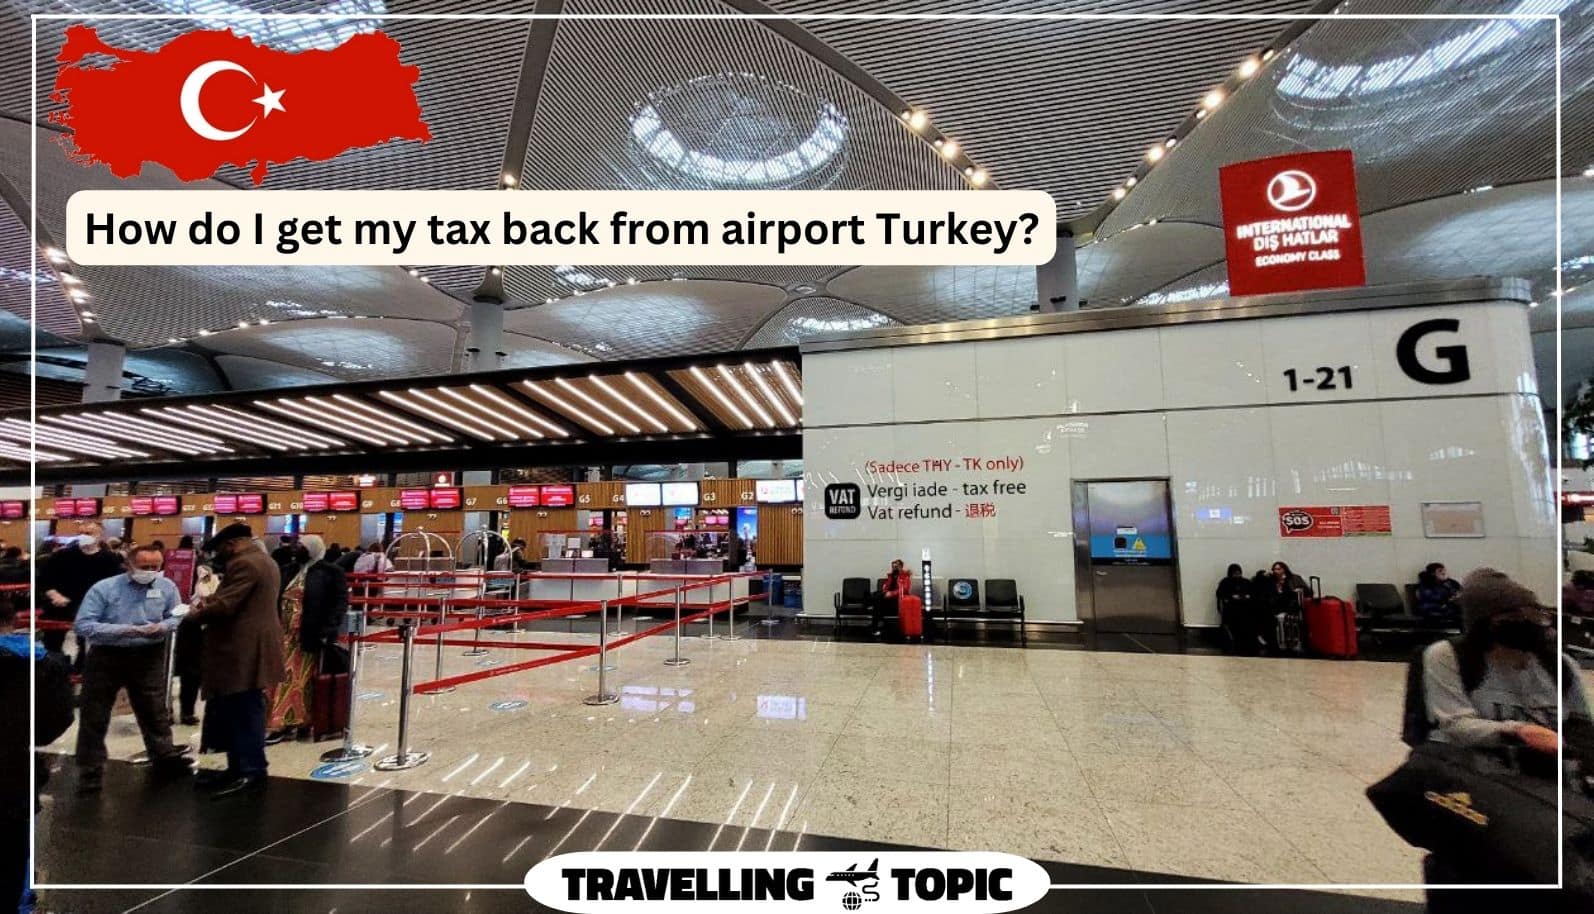 How do I get my tax back from airport Turkey?